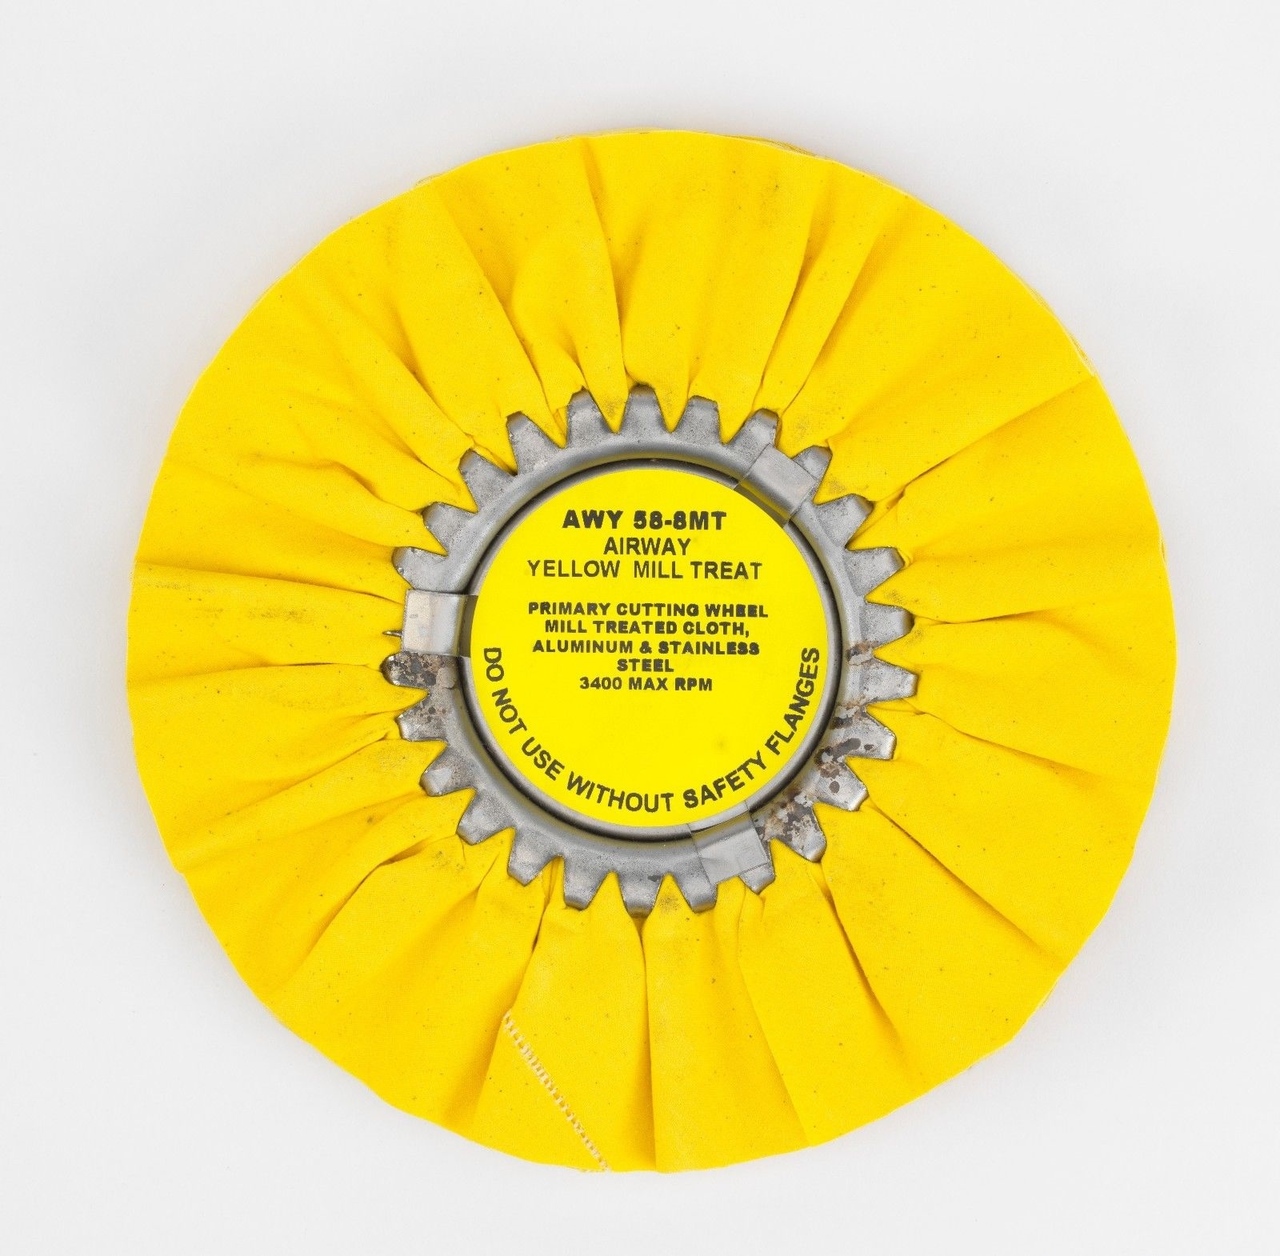 Zephyr 8" Airway Yellow Mill Treat -  Primary Cutting Wheel for Aluminum & Steel